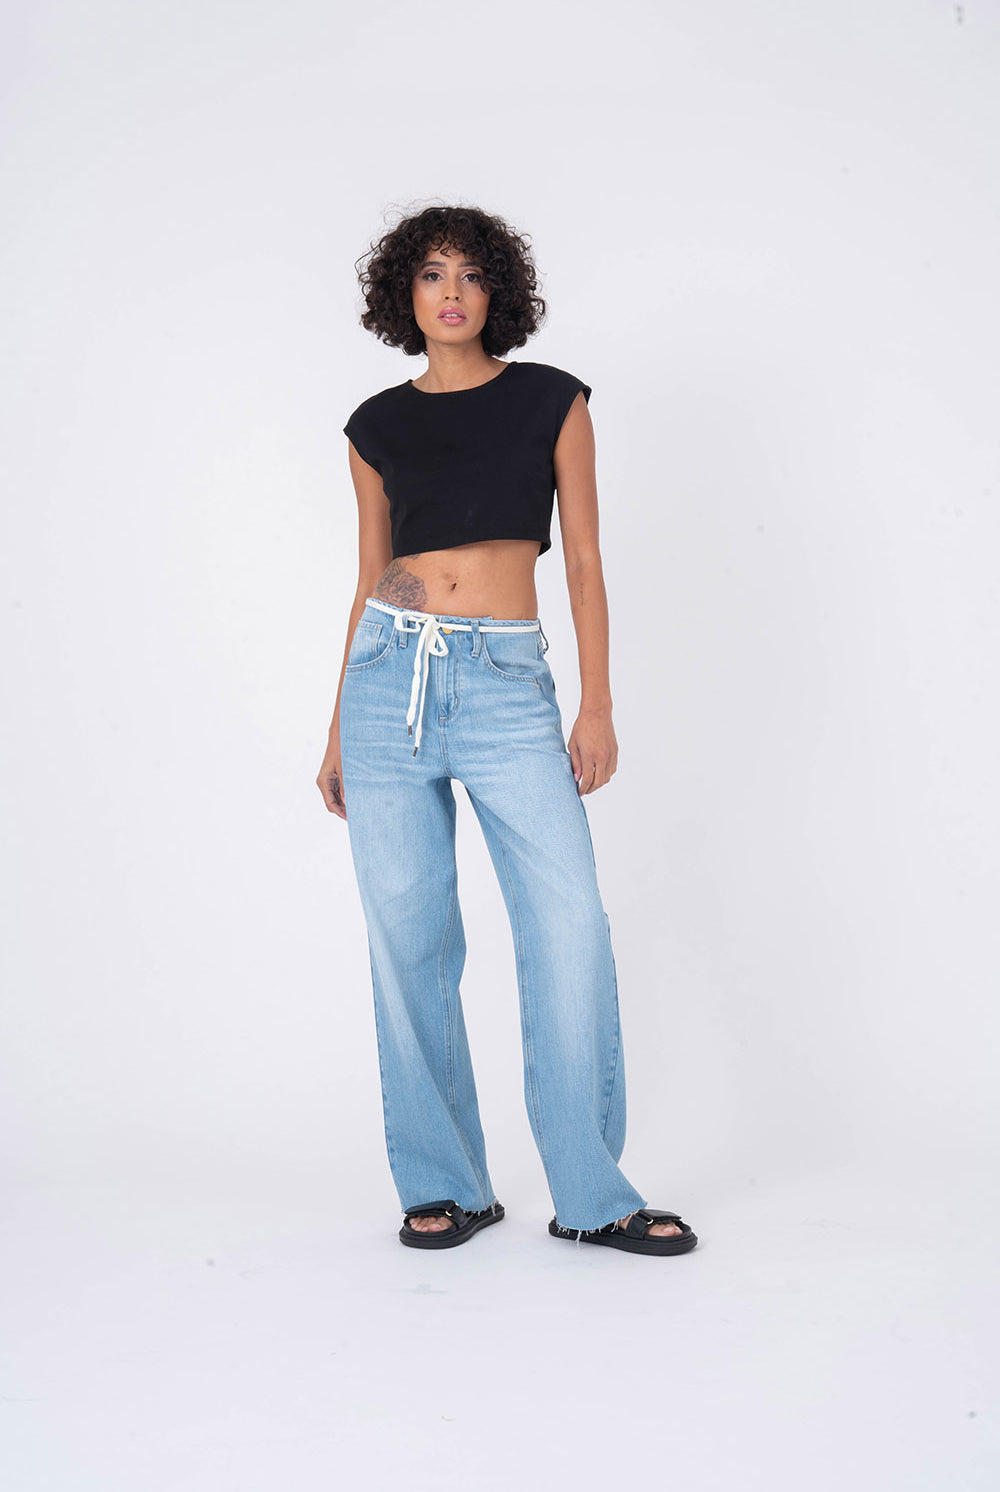 Sundae Jeans, Daze-Denim-Vixen Collection, Day Spa and Women's Boutique Located in Seattle, Washington